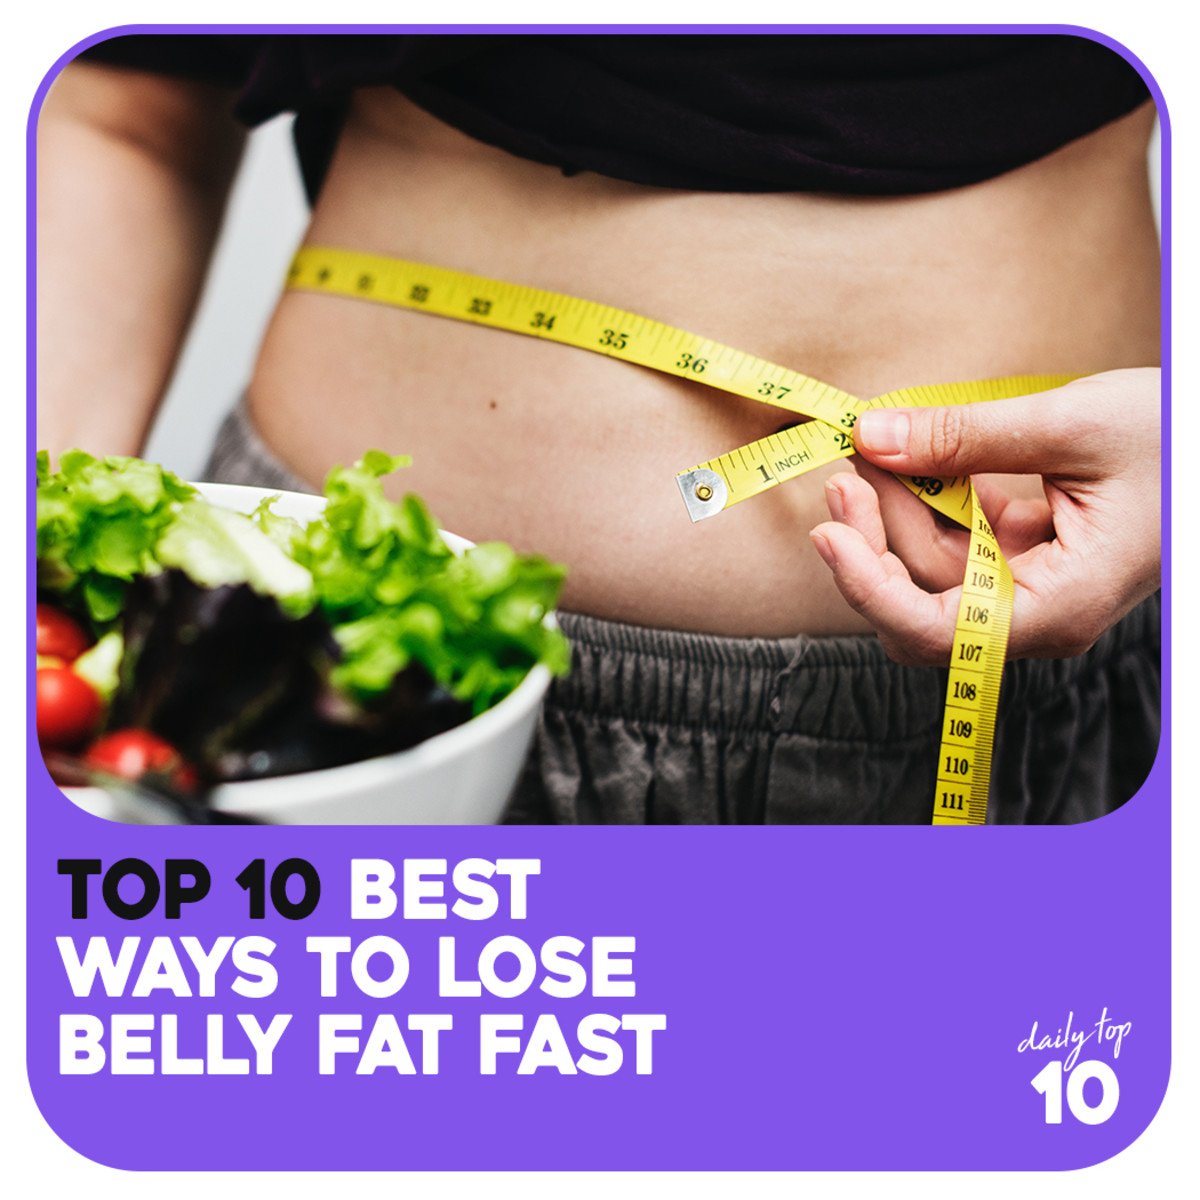 Top 10 Best Ways to Lose Belly Fat Fast